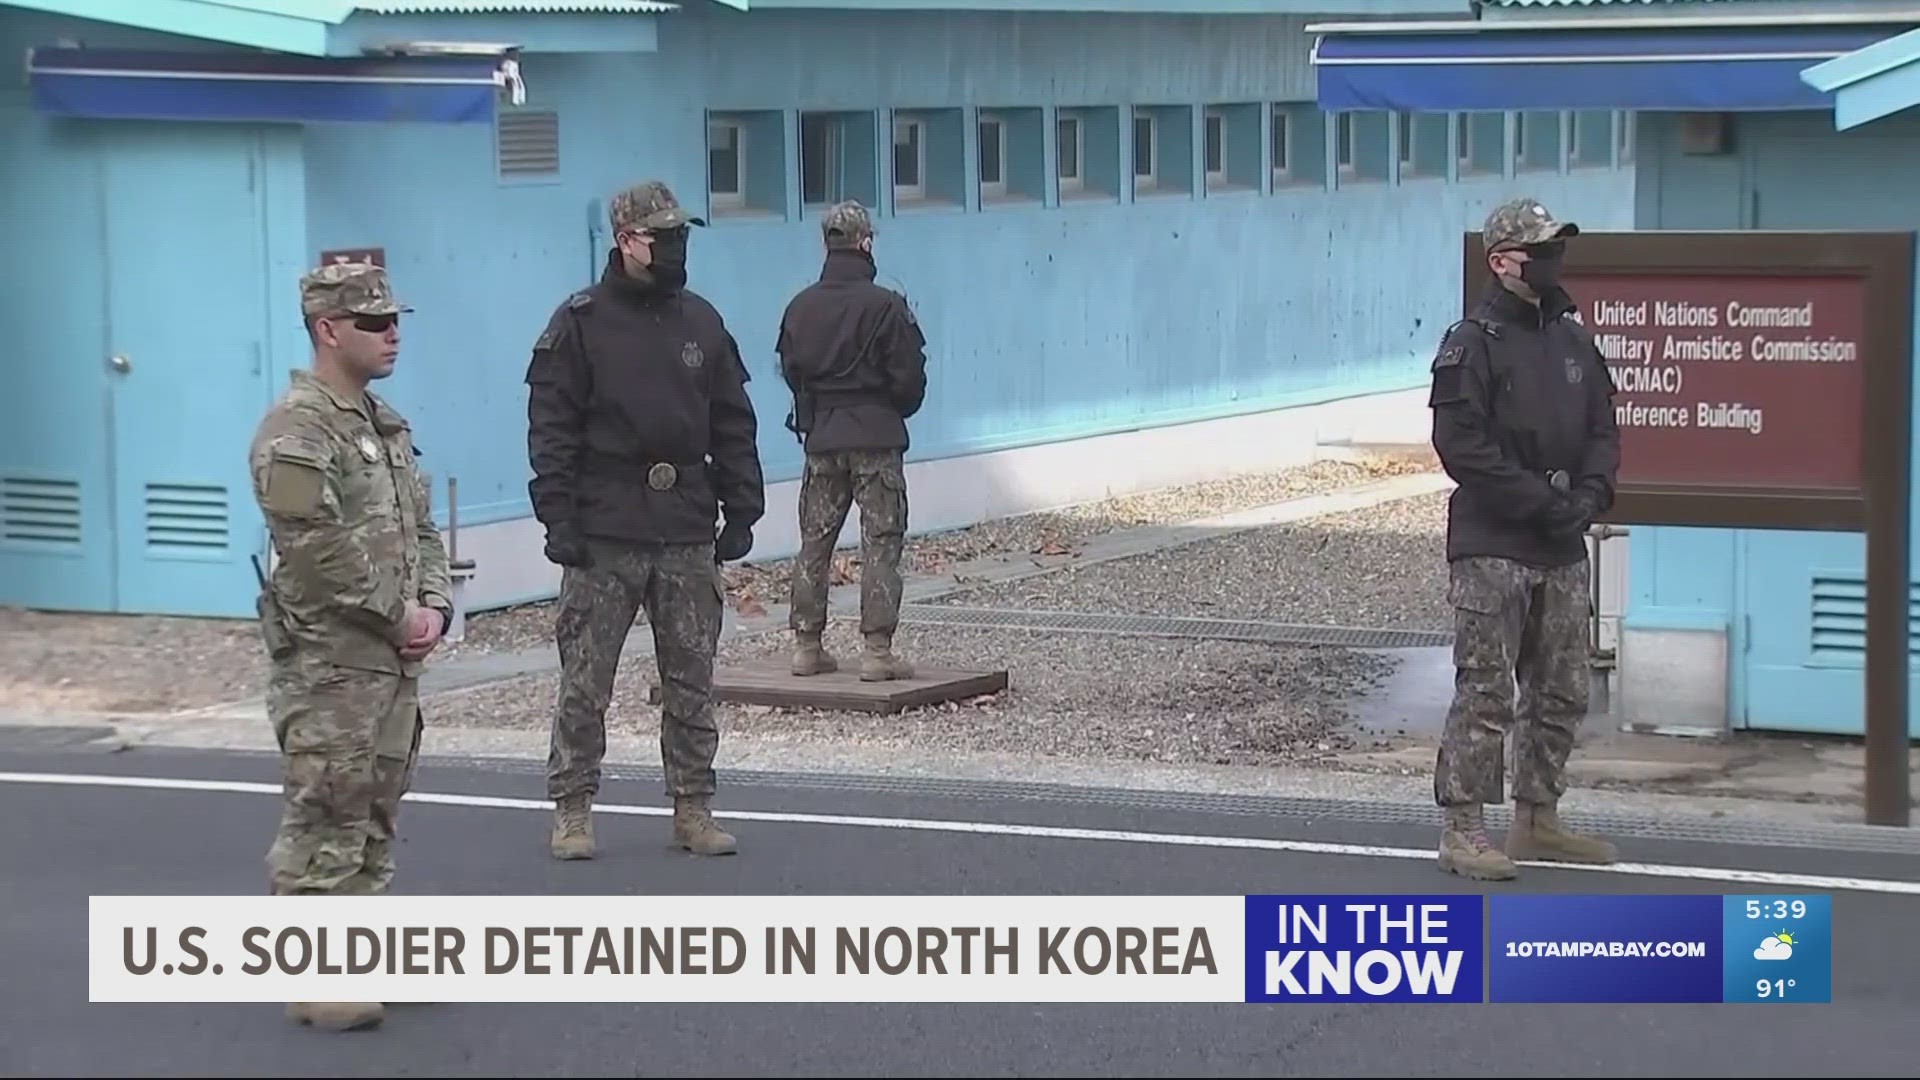 Two U.S. officials said the American soldier who fled across the border into North Korea had just been released from a South Korean prison.